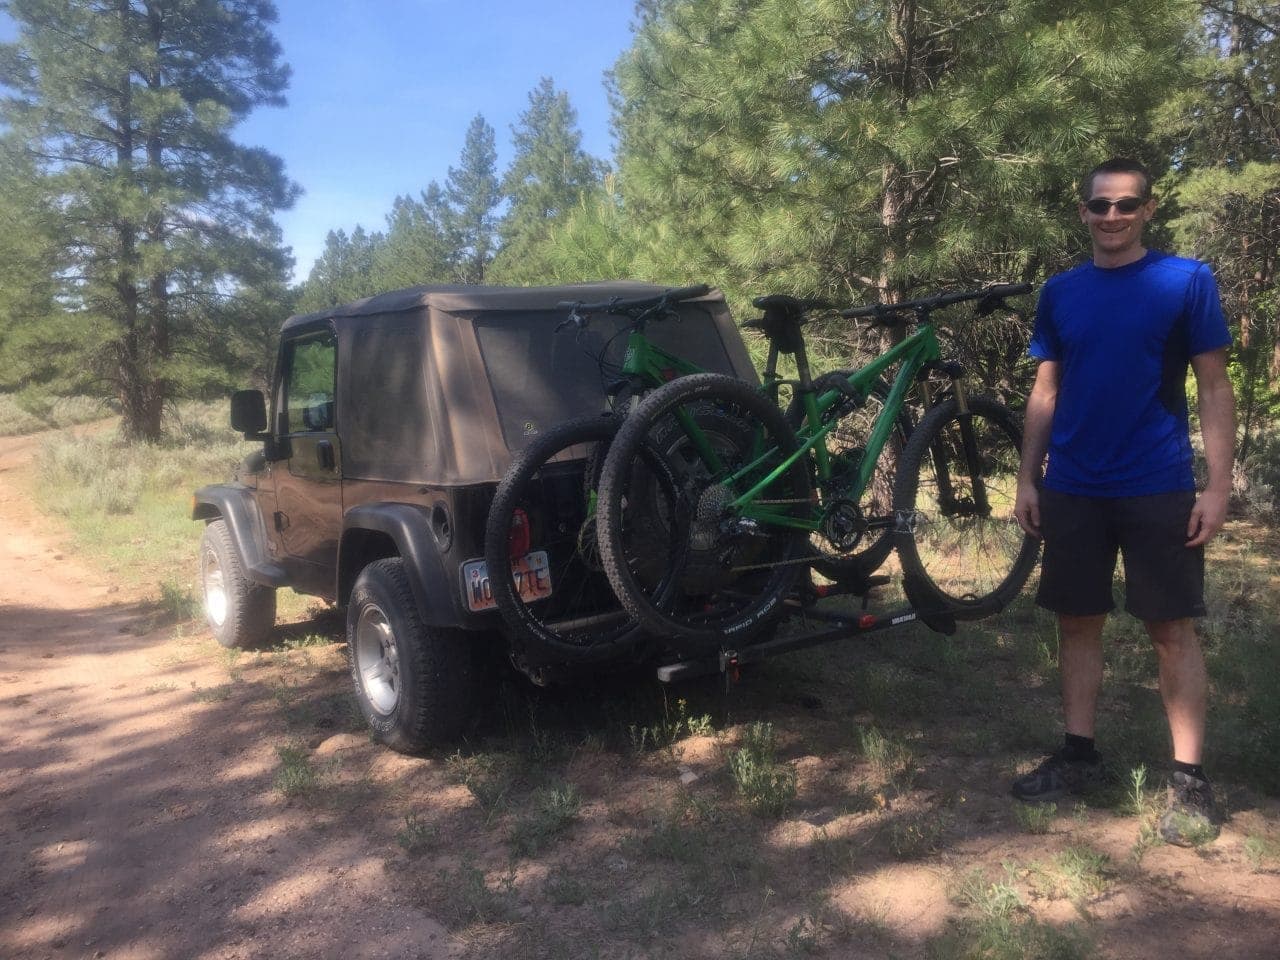 Keith is super excited to finally try out mountain biking